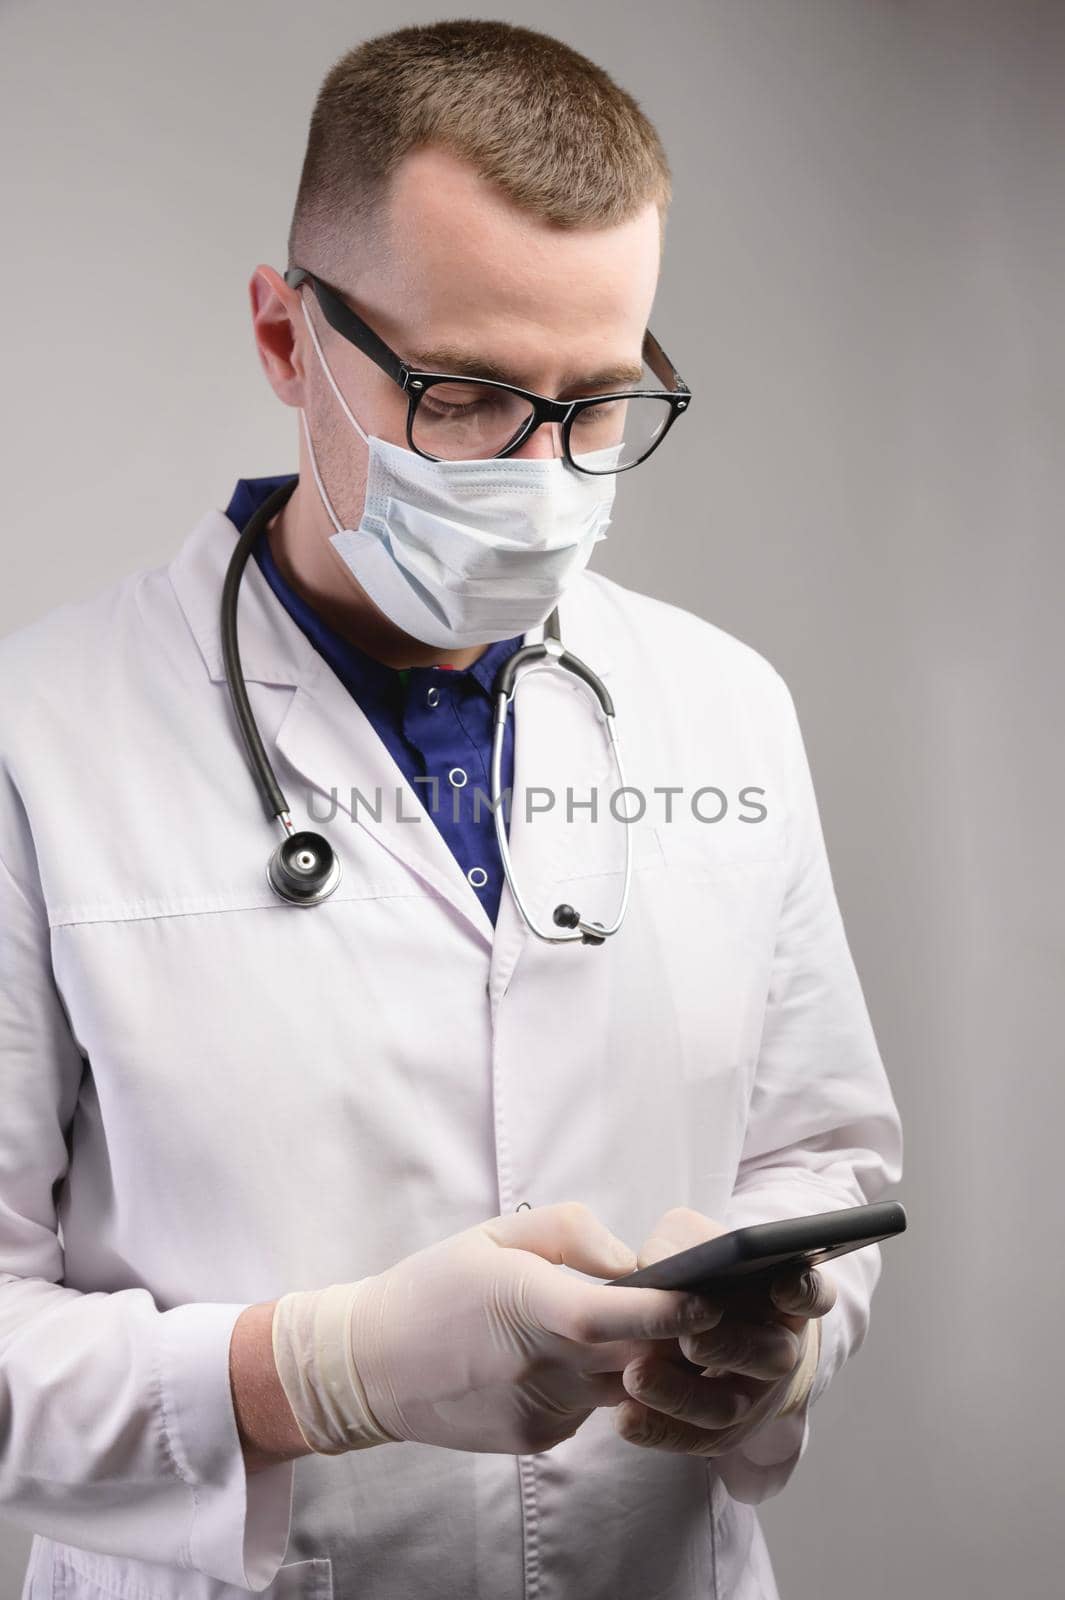 Studio portrait of a young caucasian doctor in uniform and a mask with an smartphone in his hands on a white background with copy space in the frame. by yanik88